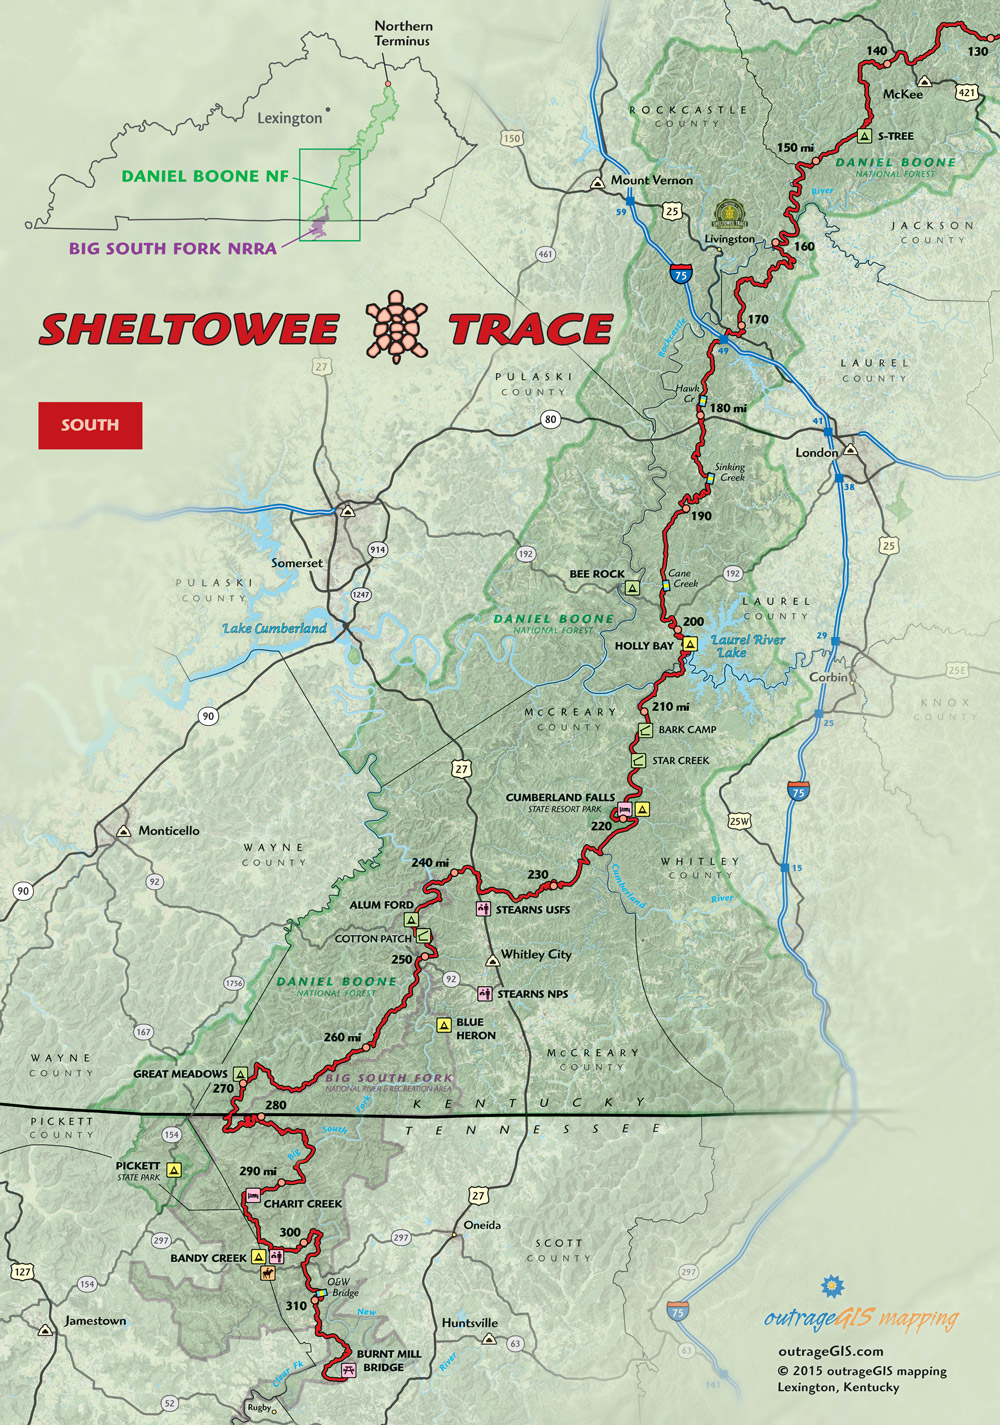 Sheltowee Trace South Trail Map (includes Big South Fork)